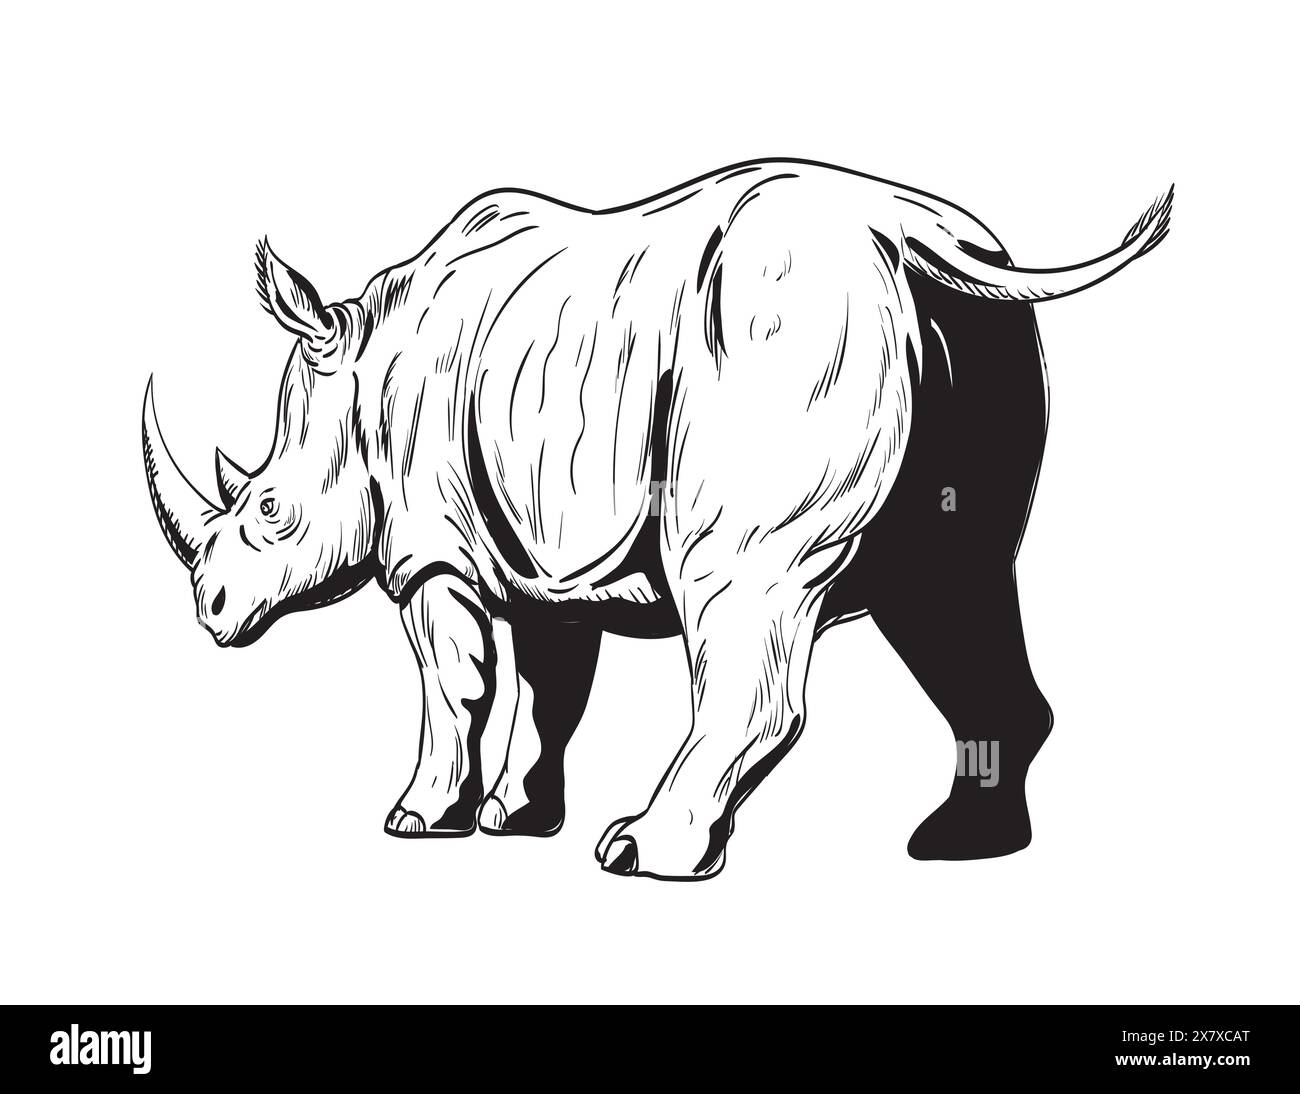 Comics style drawing or illustration of a rhinoceros or rhino, an odd-toed ungulates in the family Rhinocerotidae, charging viewed from low angle isol Stock Vector